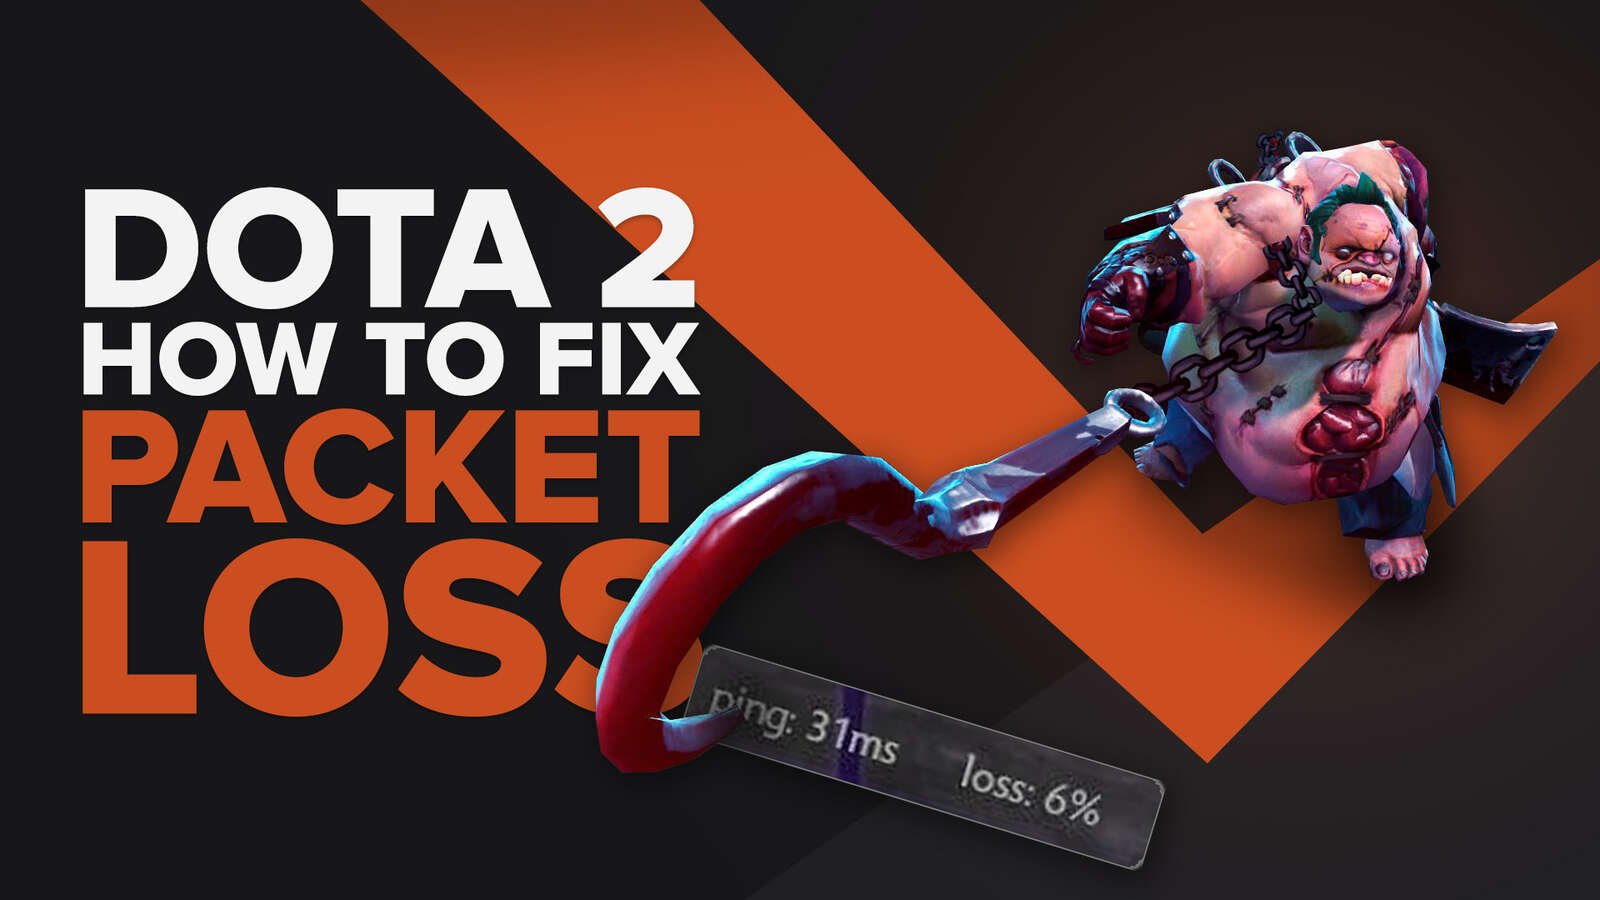 How to Fix Packet Loss in Dota 2 Quickly? [5 Working Ways]